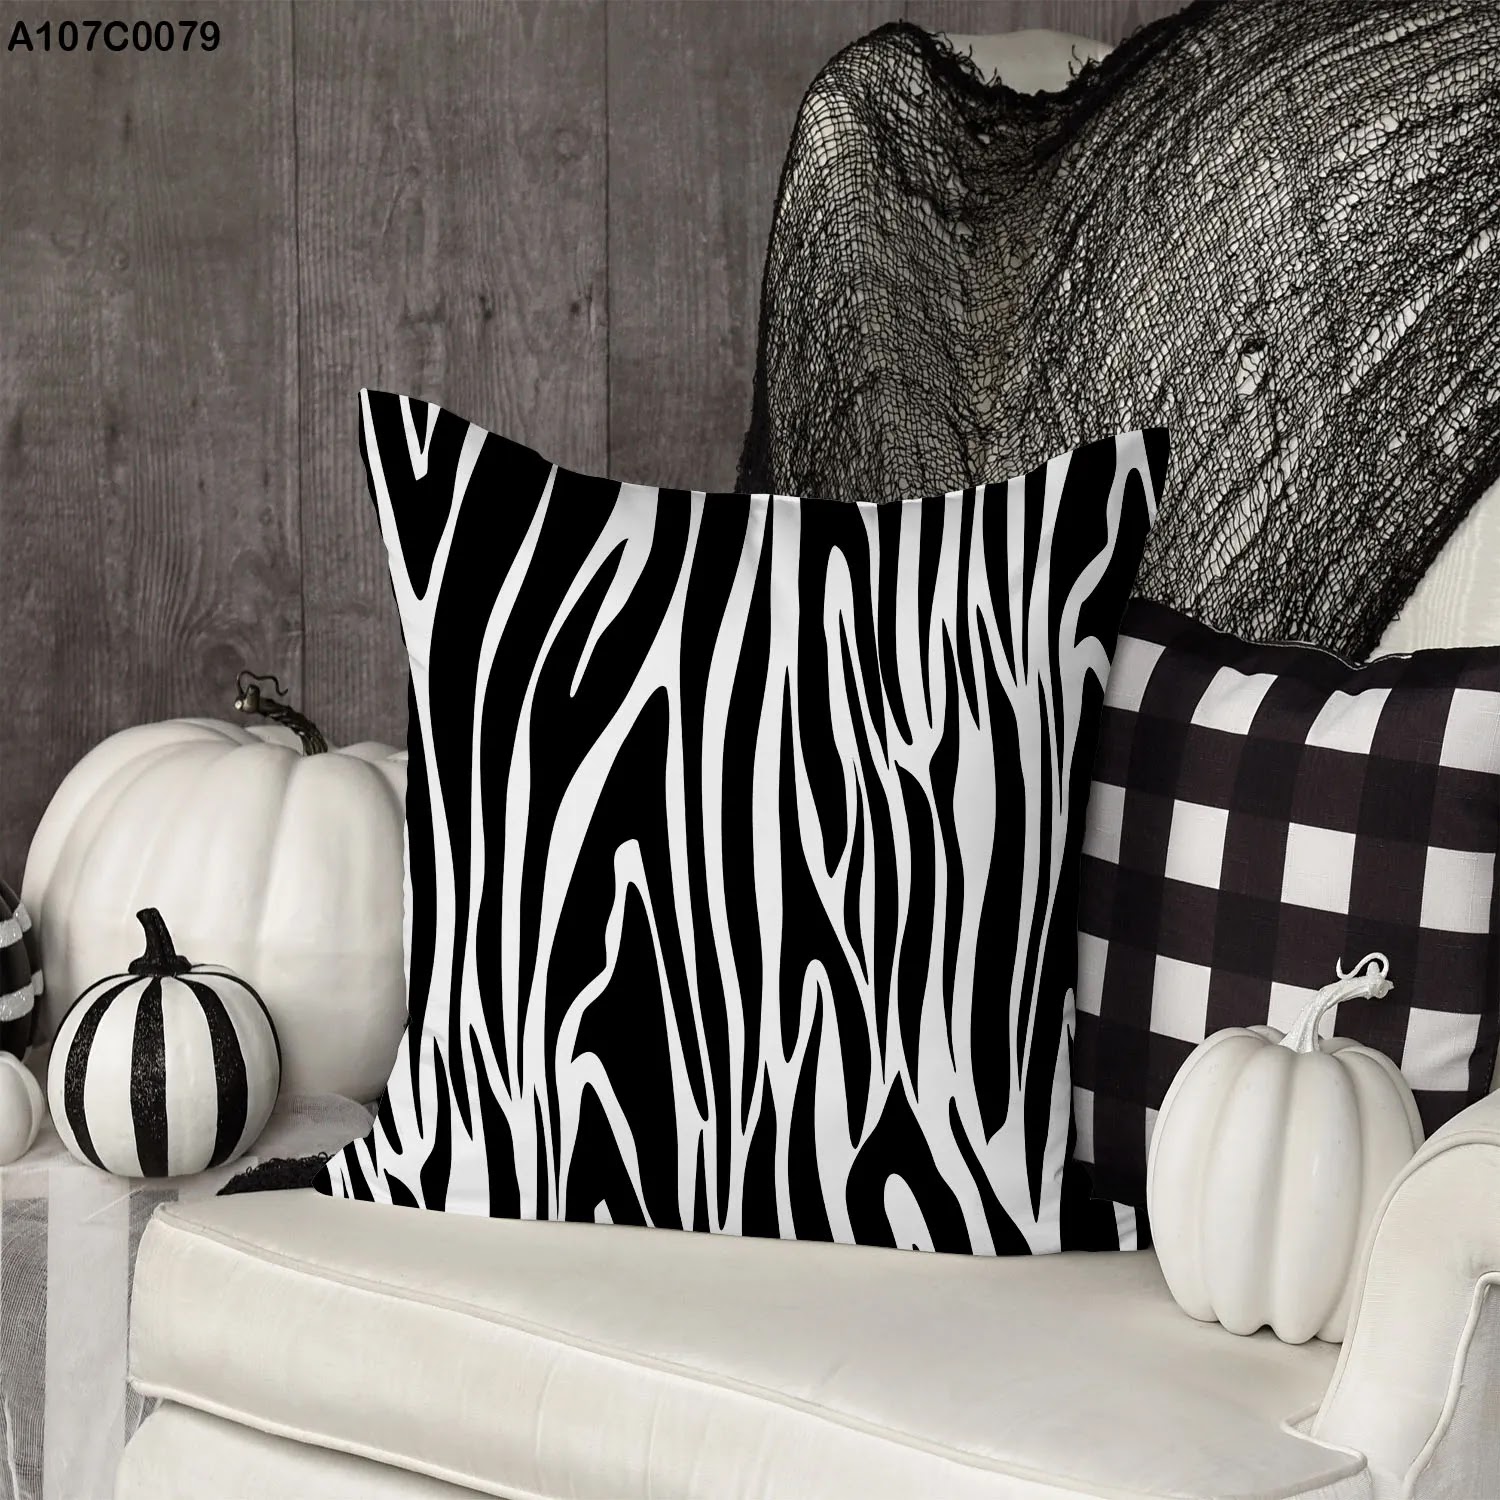 Black and white striped pillow case